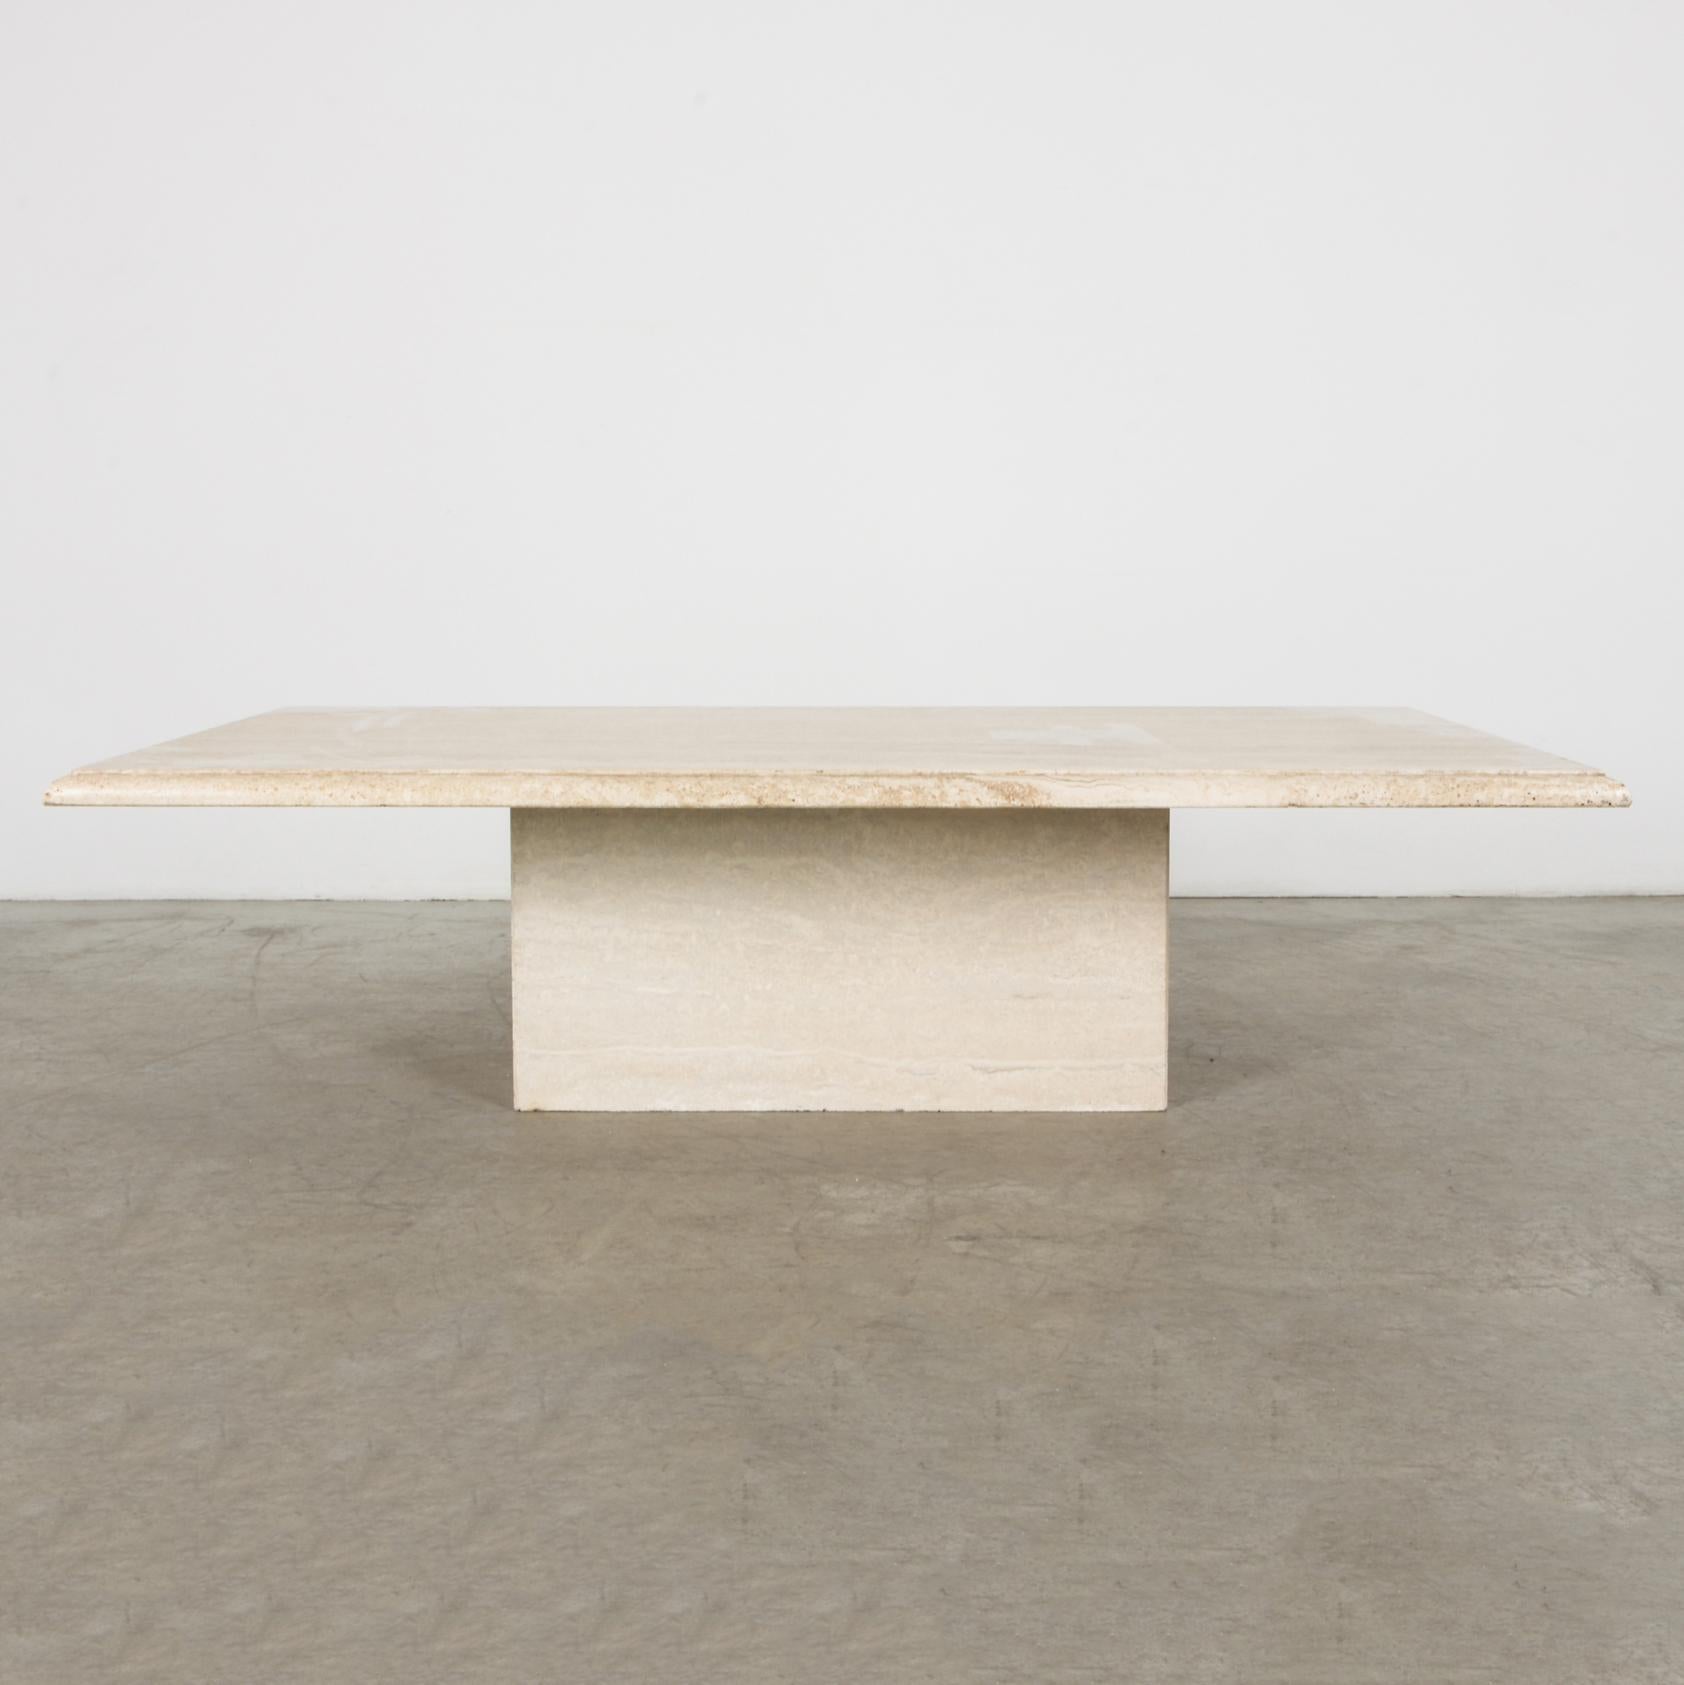 A cantilevered slab of textured travertine rests on a rectangular base in this stylish and simple coffee table. The tabletop is carved with dupont edge profile.

Stone is a material rich in itself. Echoing classical sculpture, a design that's sleek